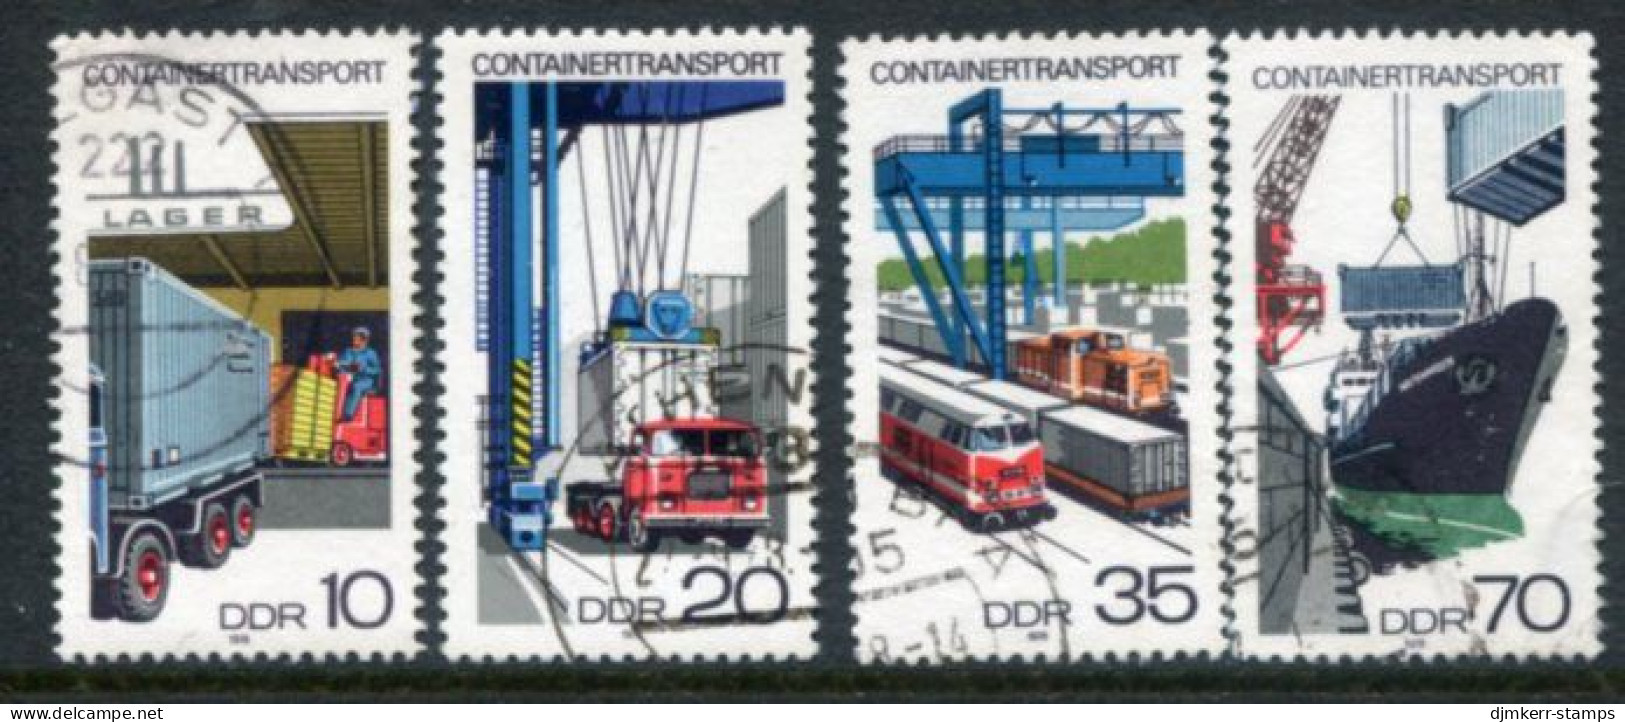 DDR / E. GERMANY 1978 Container Transport Used.  Michel 2326-29 - Oblitérés